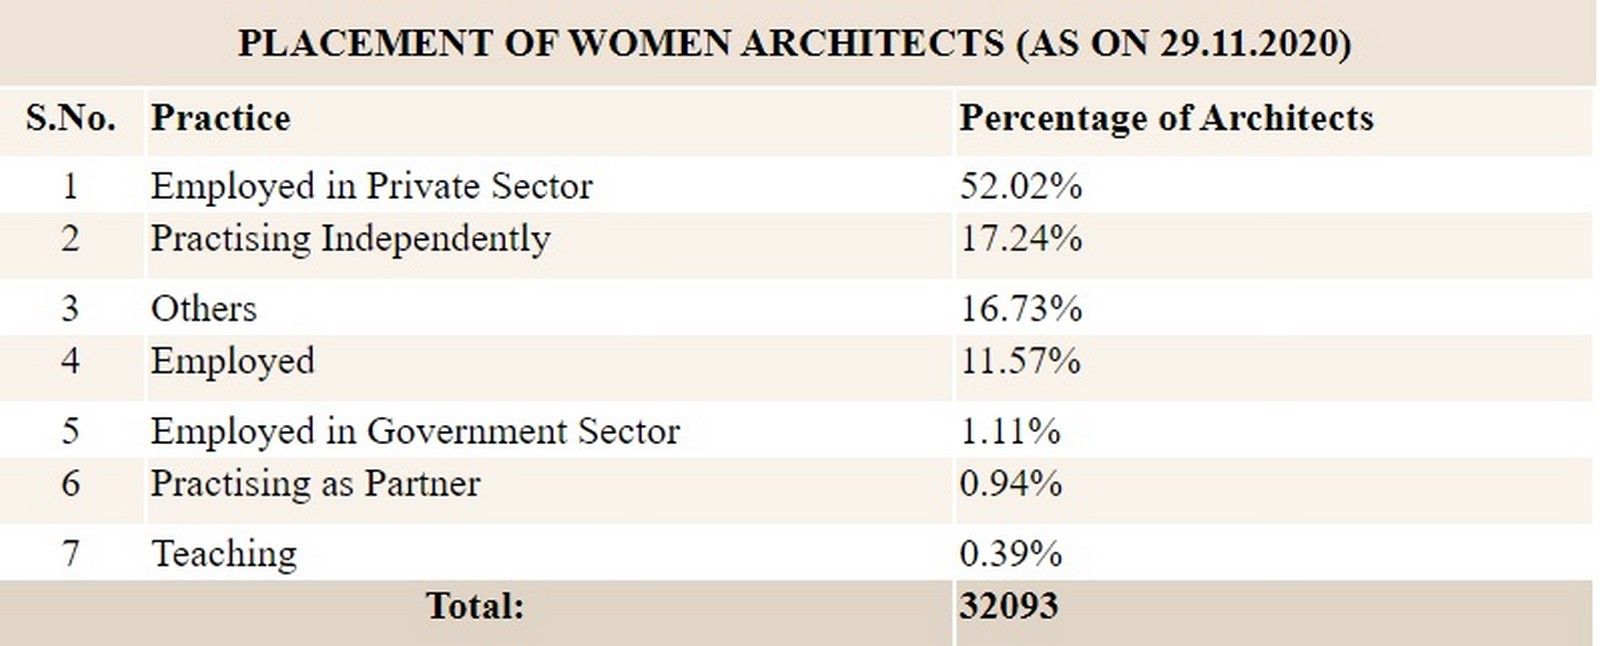 Placement of women architects in India in the year 2020